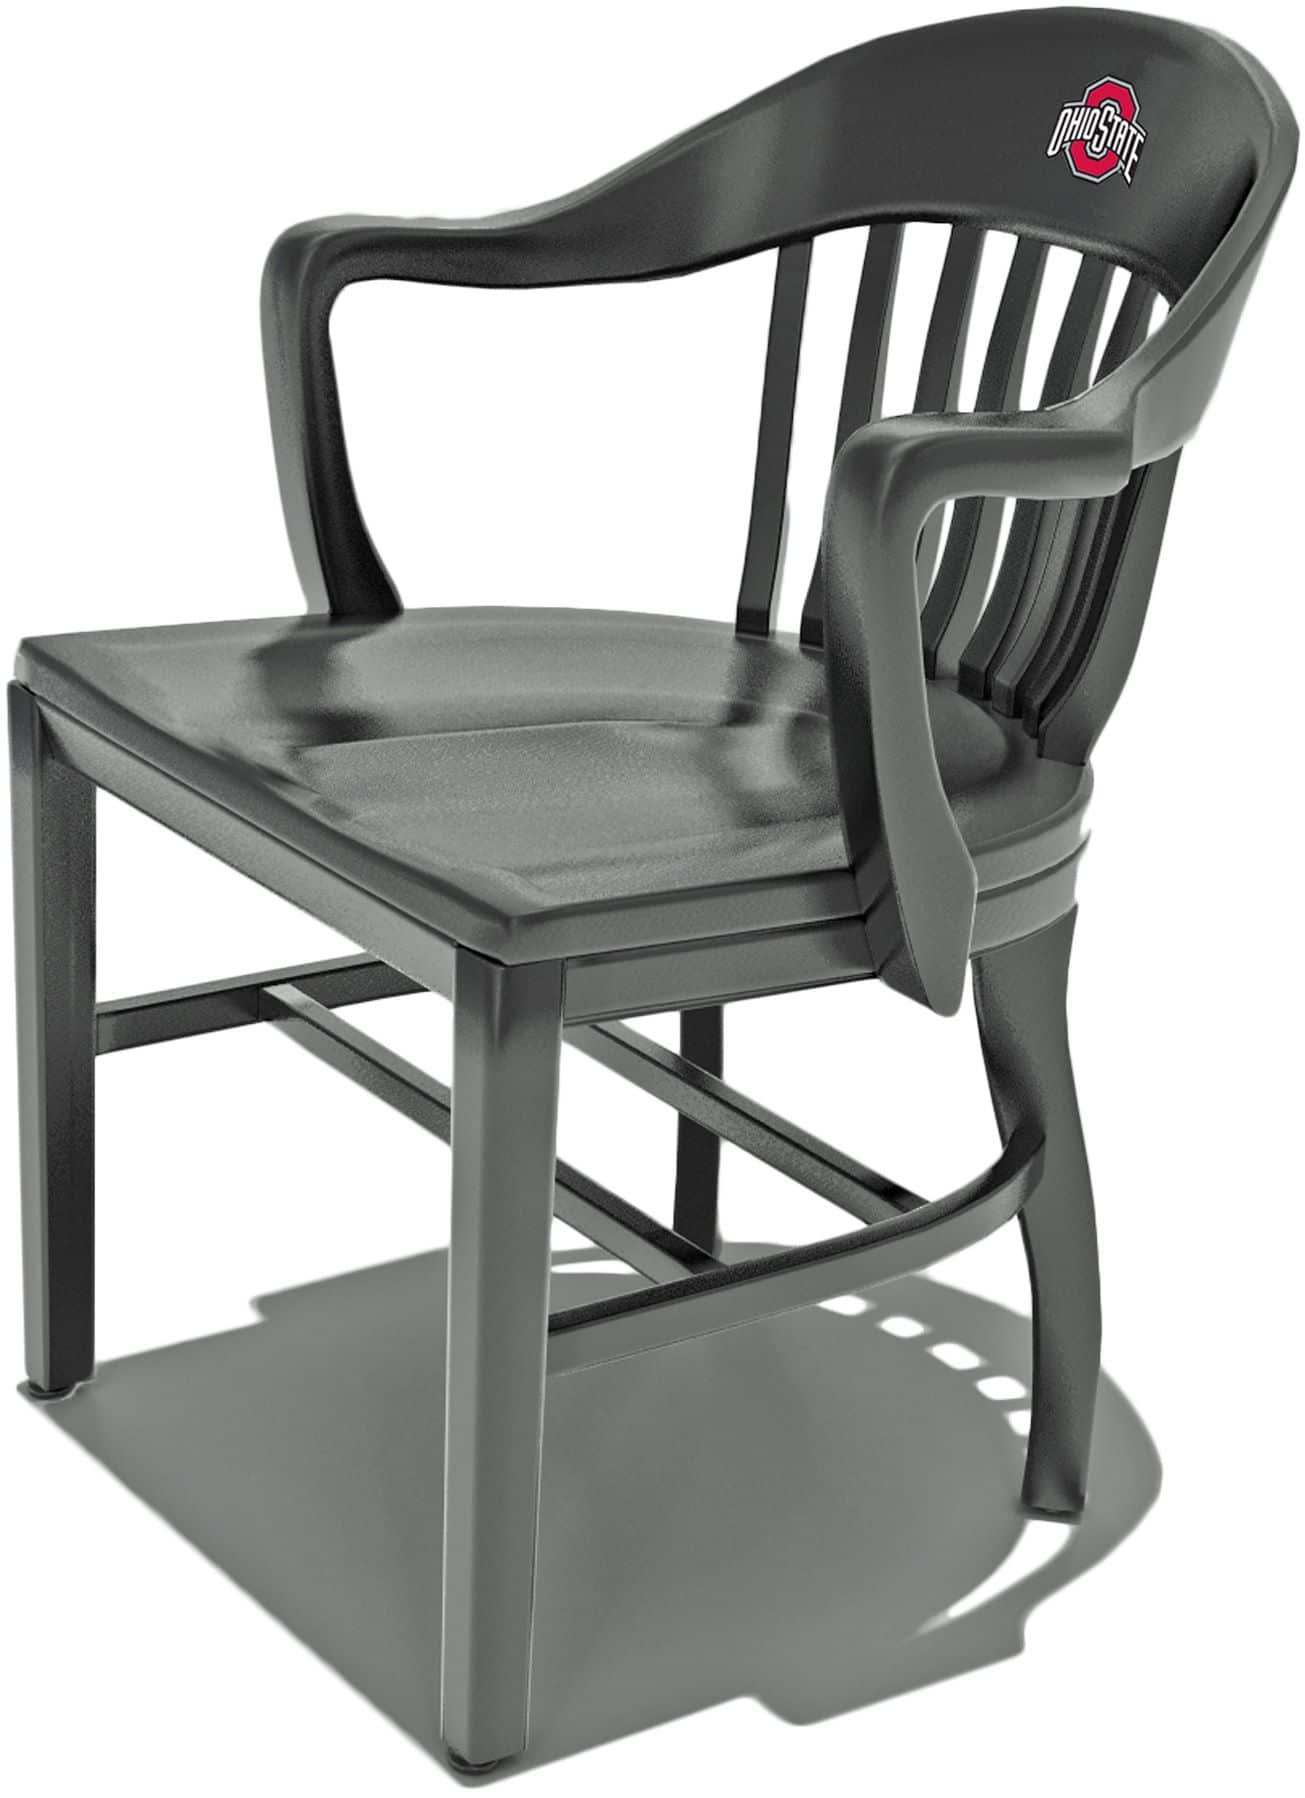 Ohio State Chair with OSU Athletic logo for college chairs